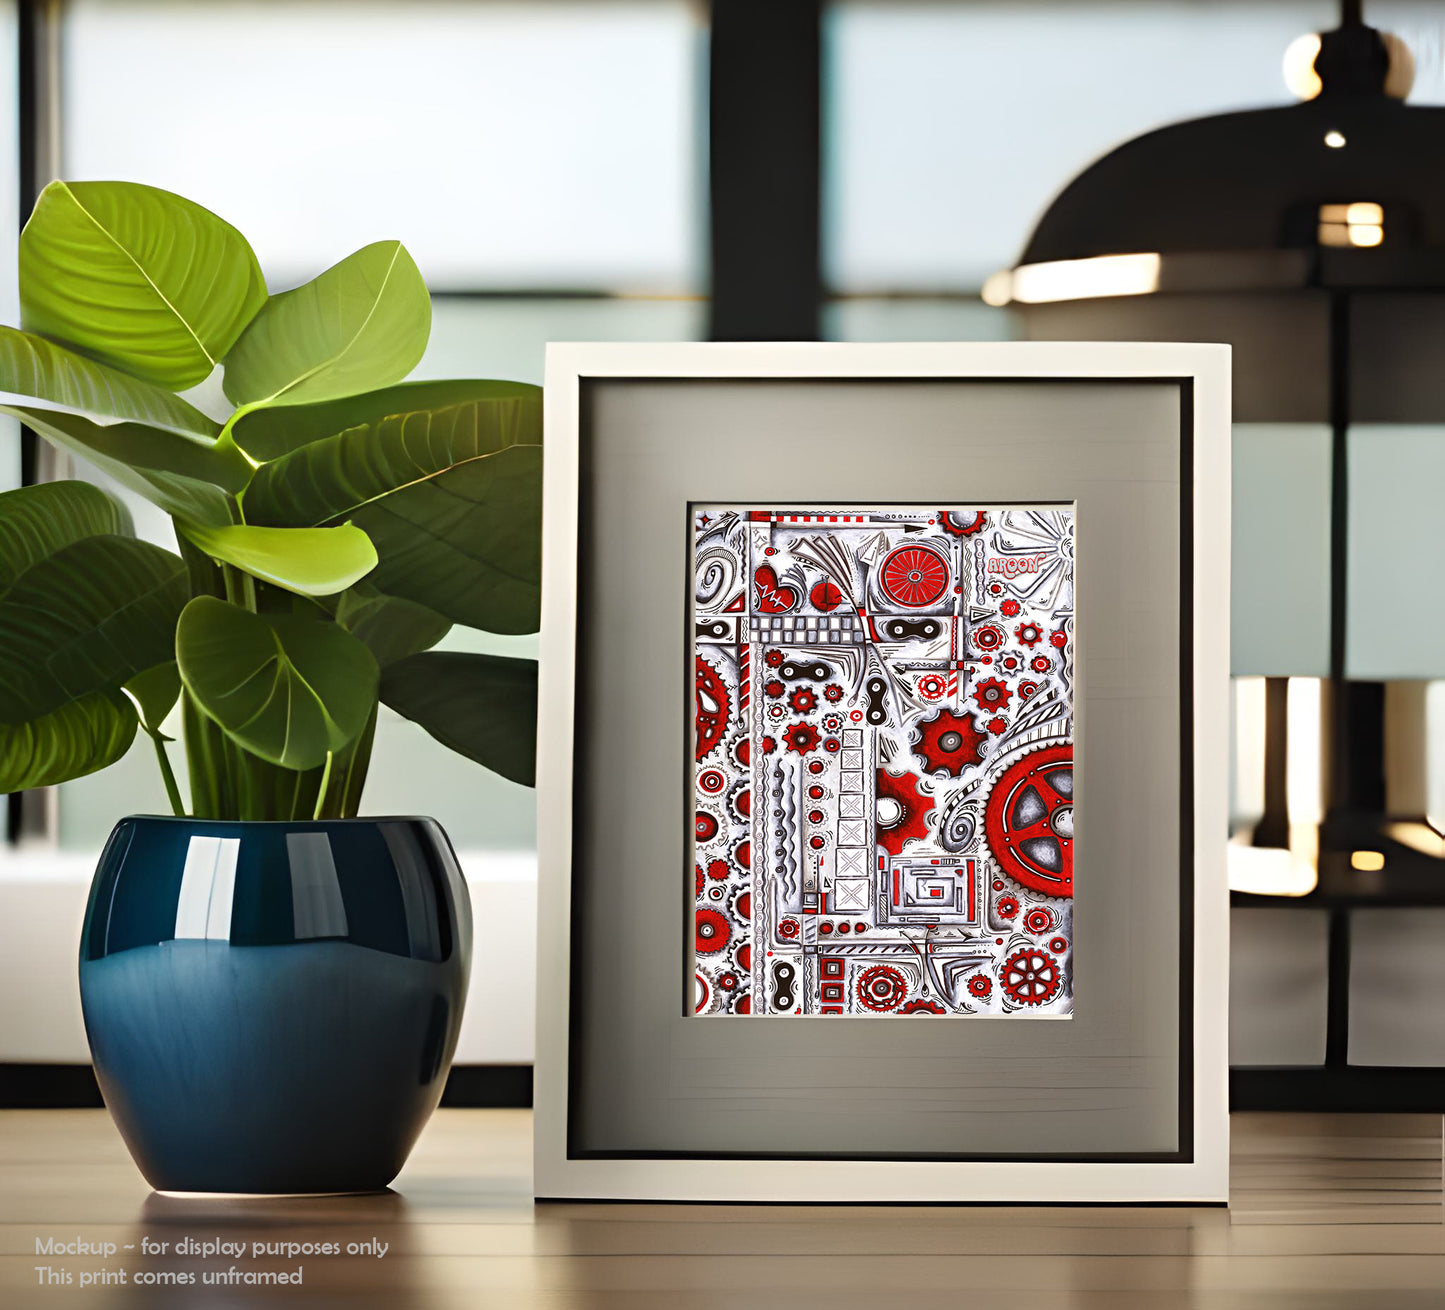 room frame mockup fine art print poster of an original handpainted cycling painting featuring chains and gears by MeganAroon for cycling brand AROON